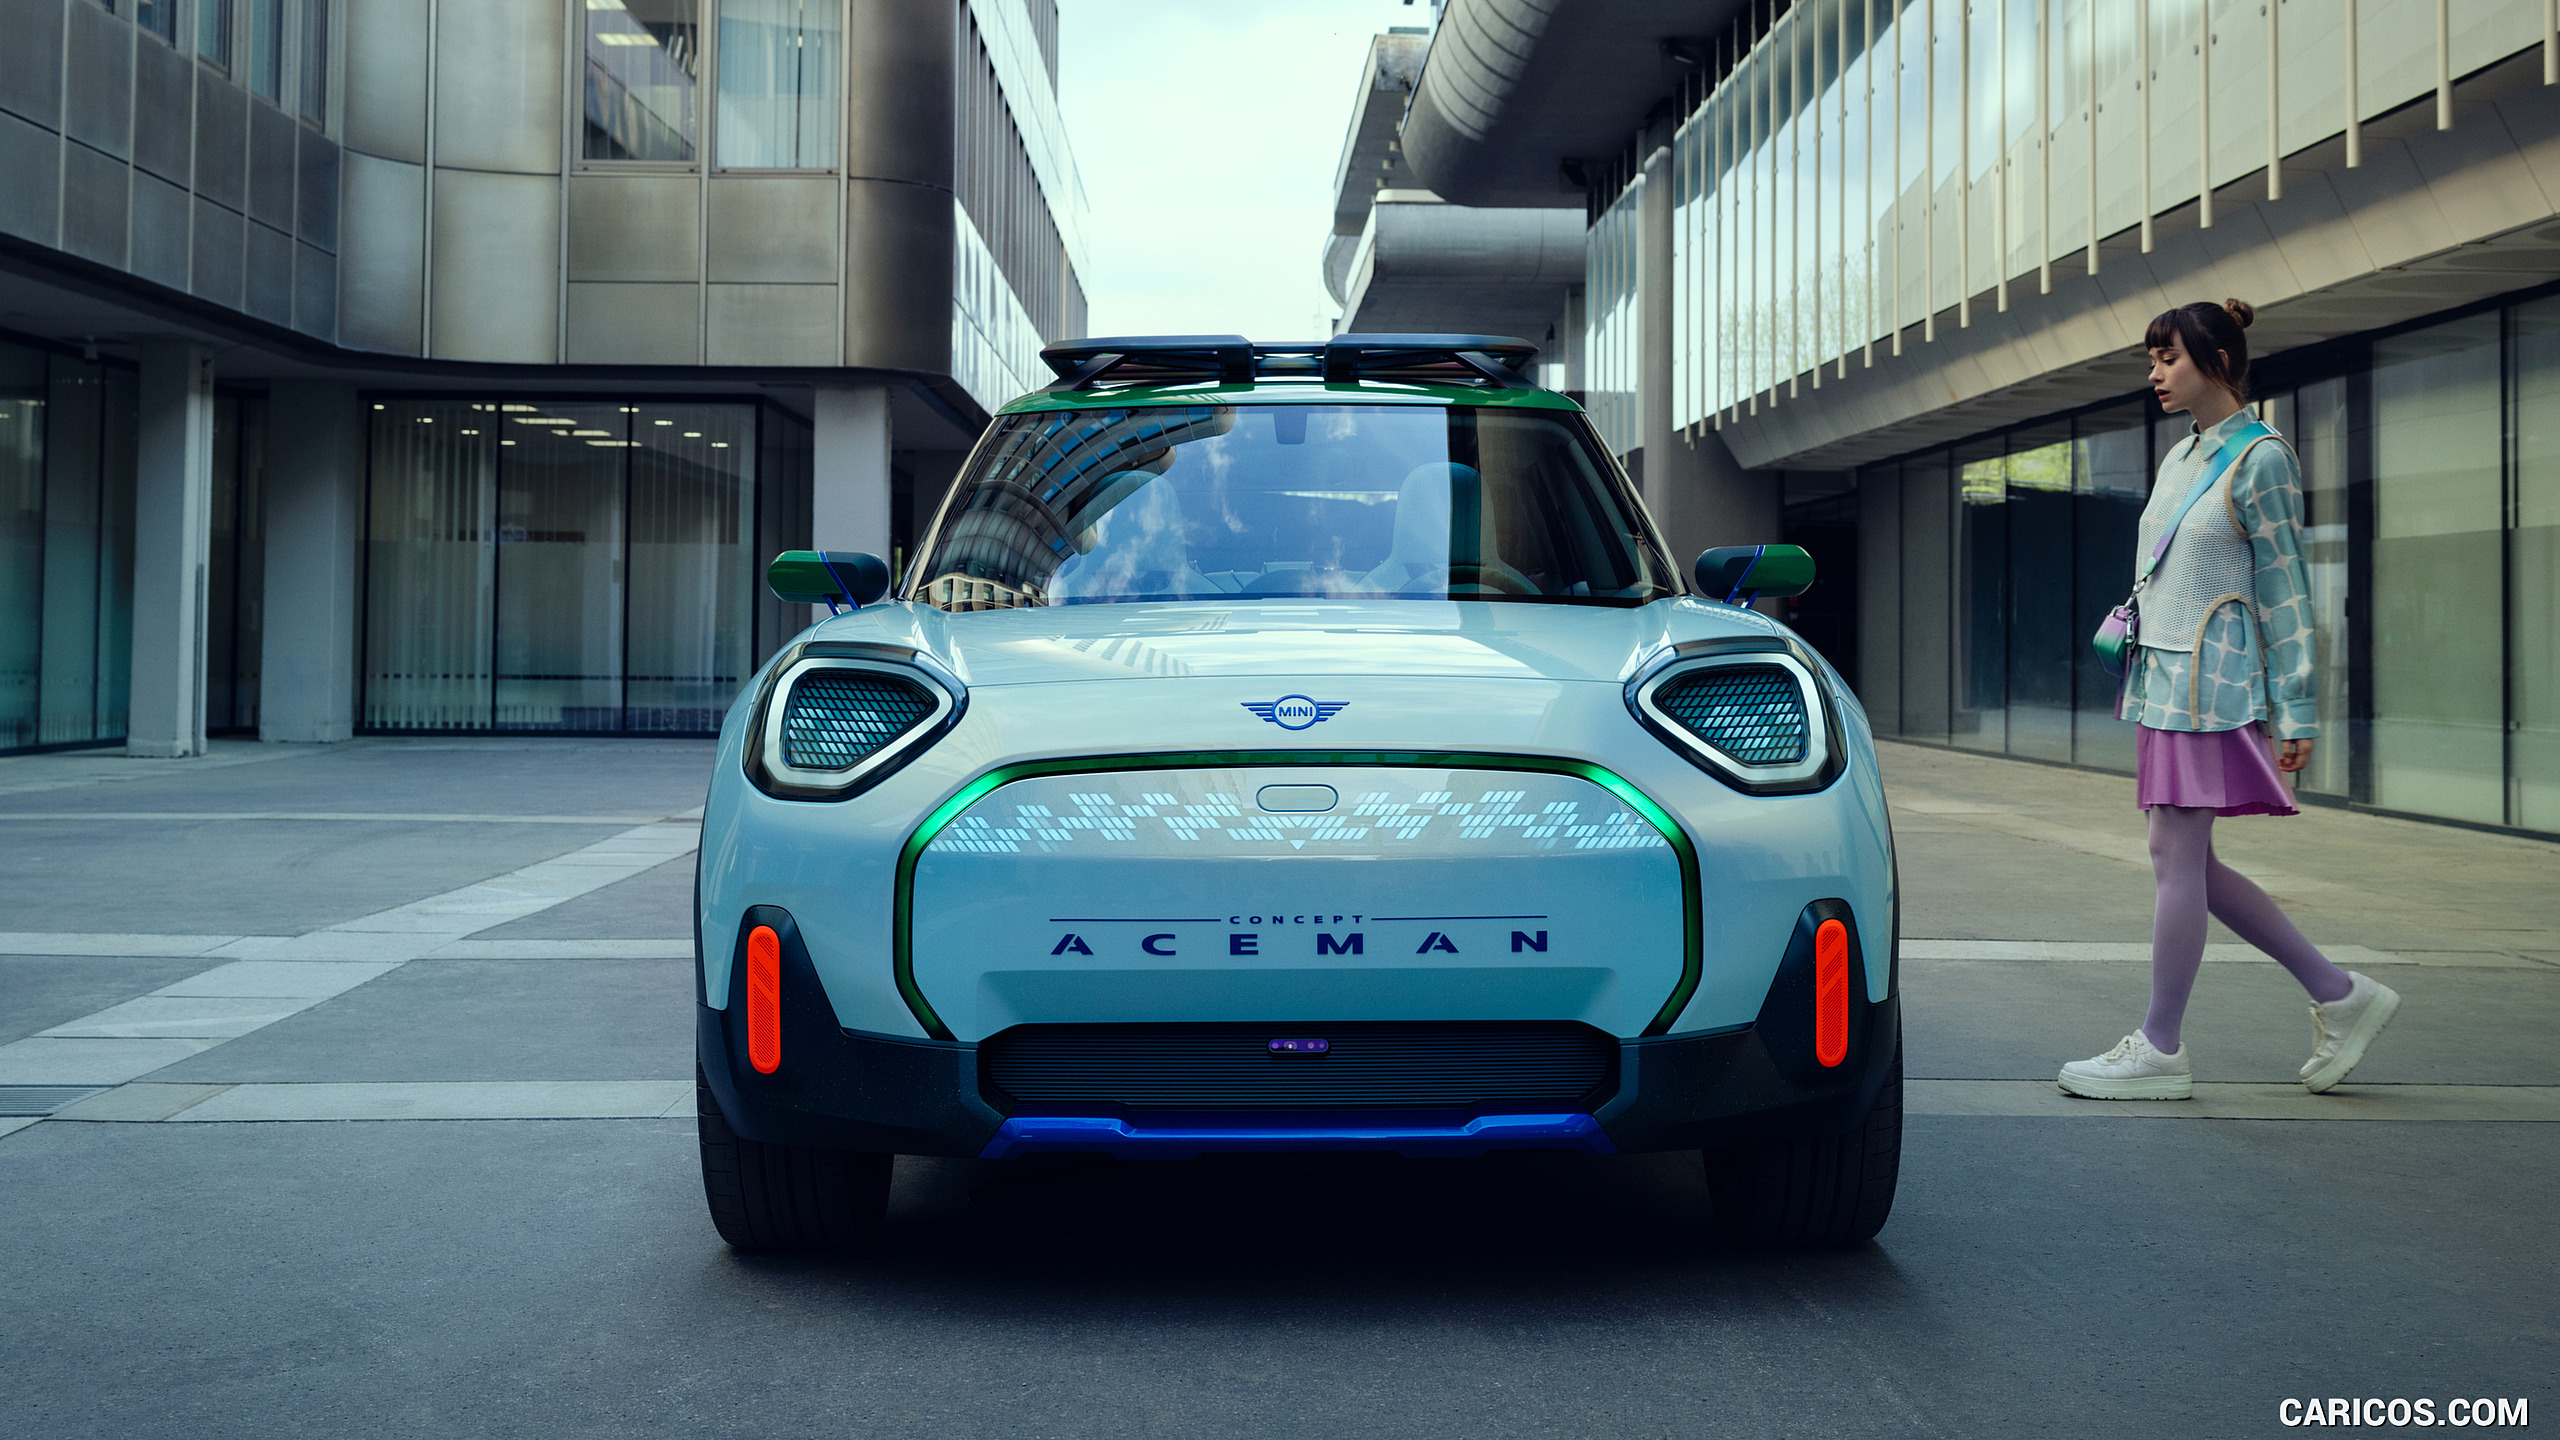 2022 MINI Aceman Concept - Front, #3 of 97